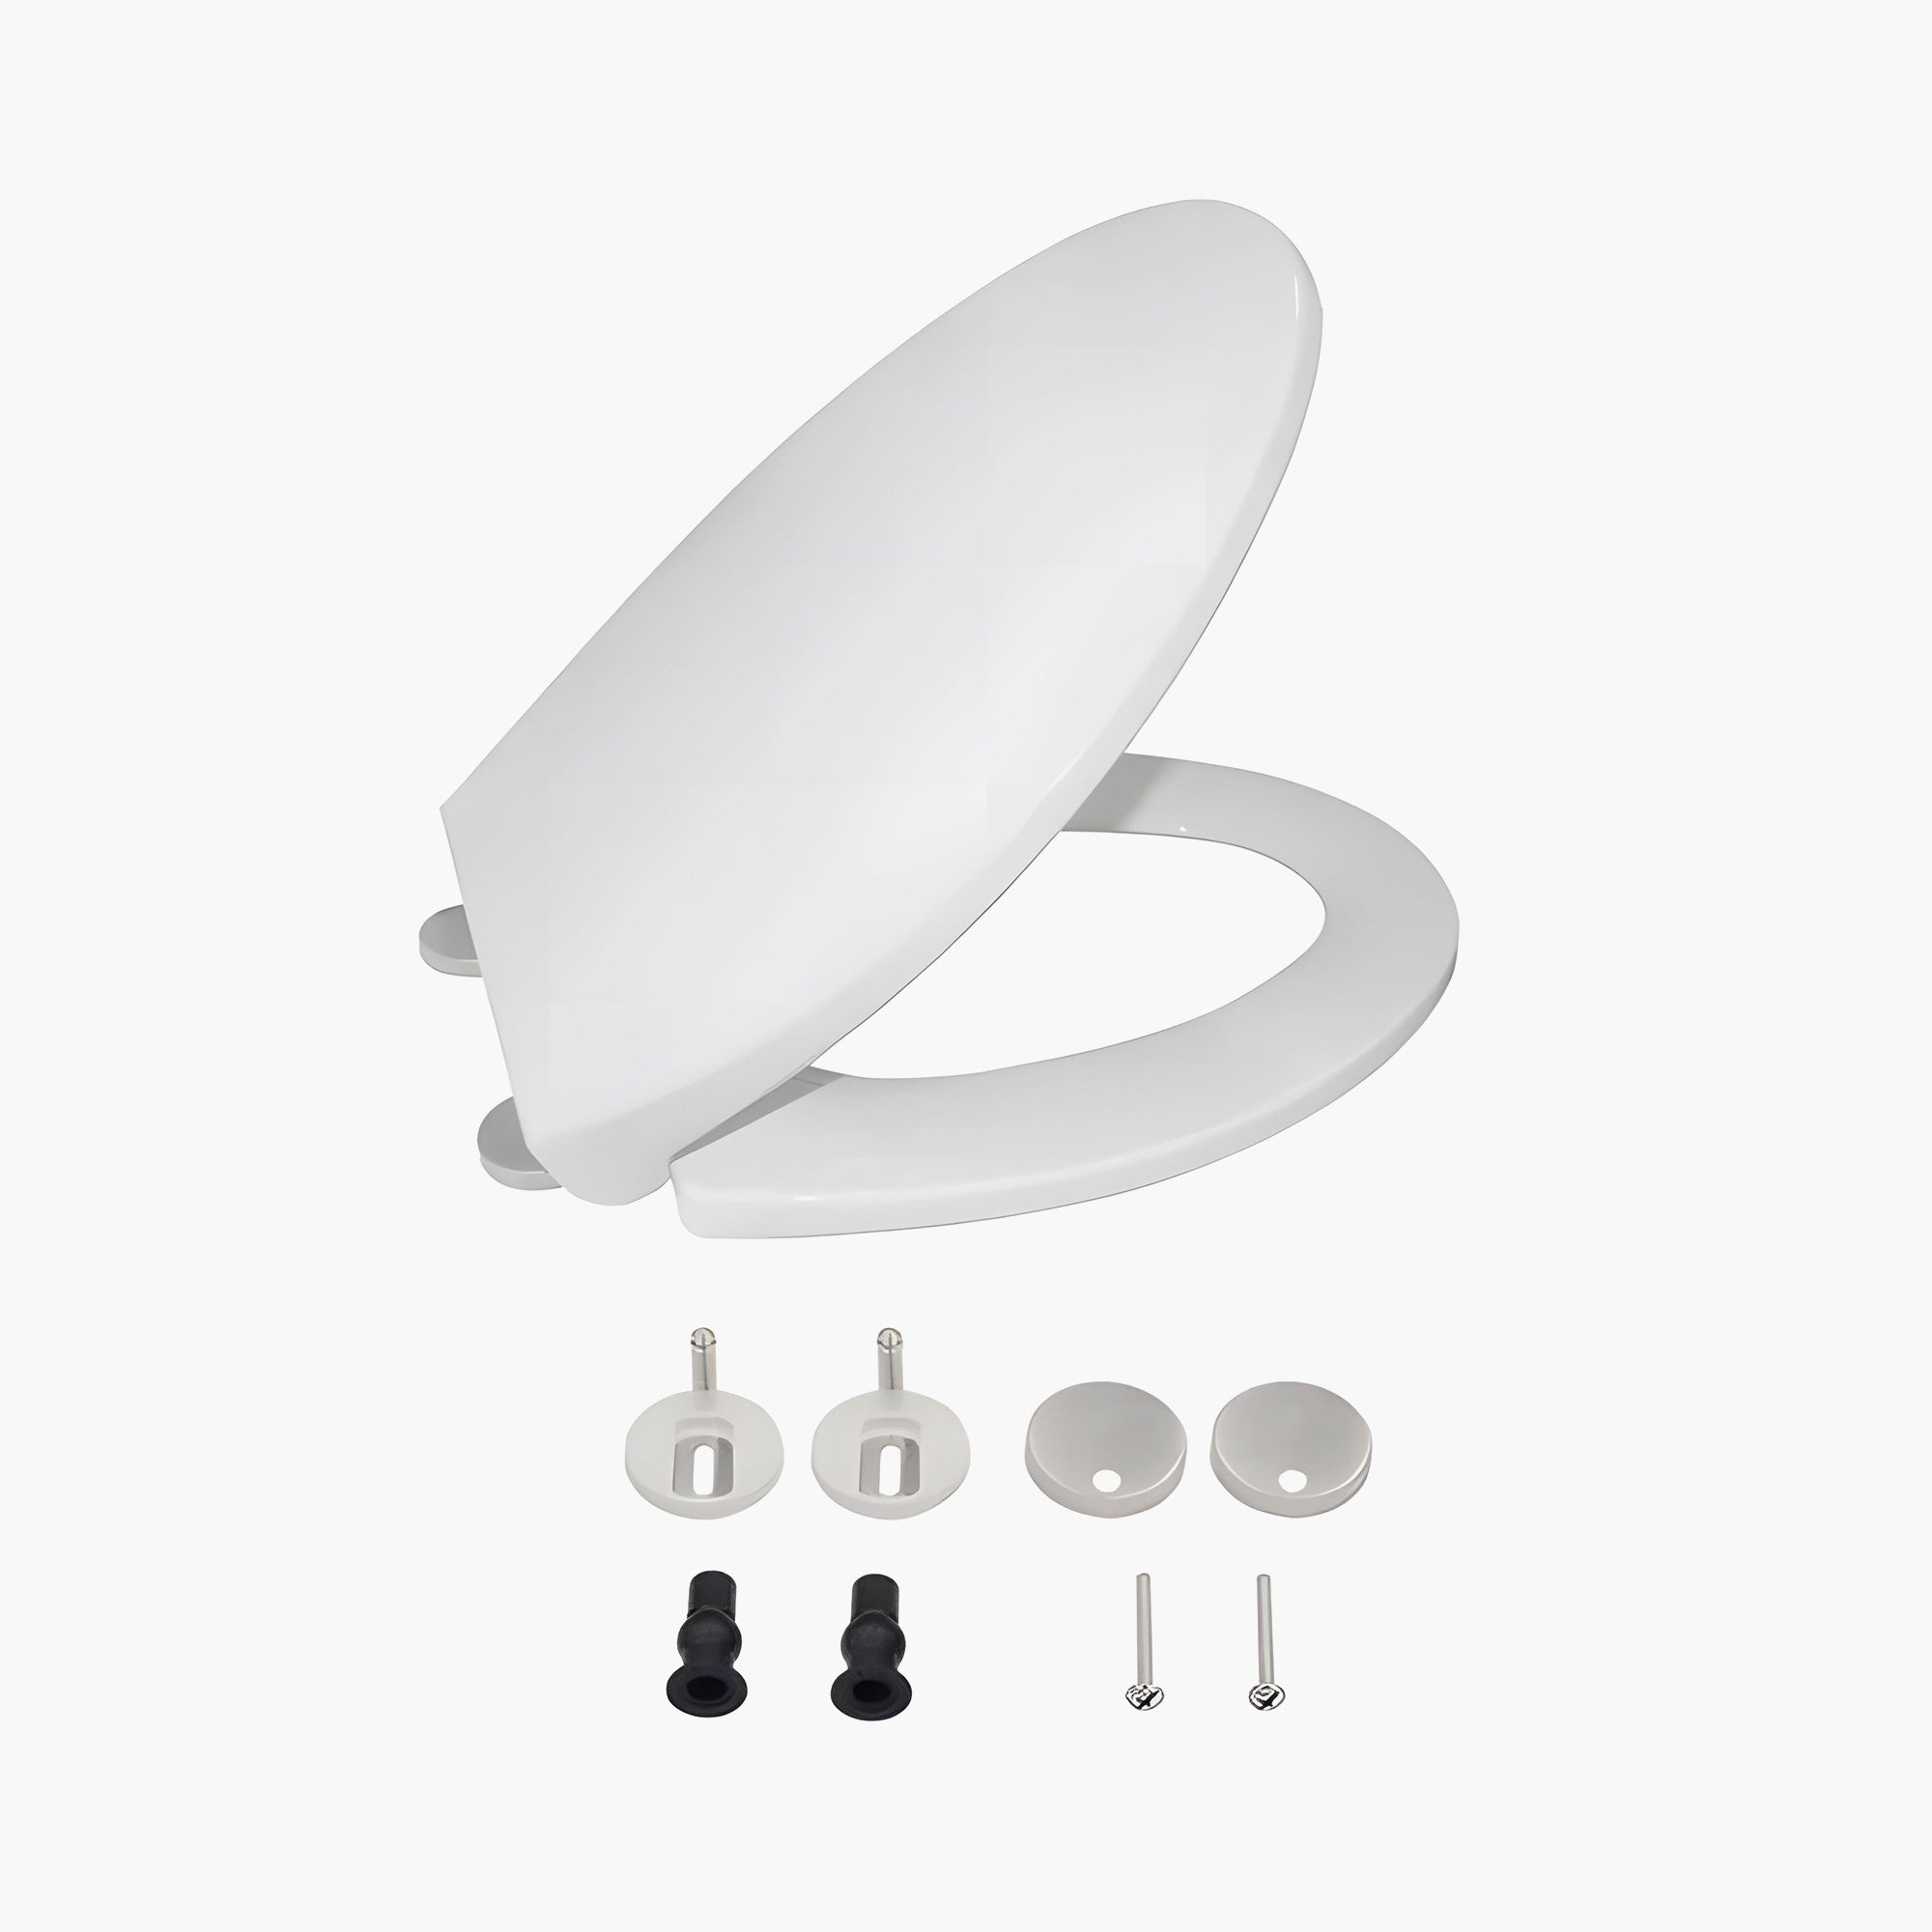 HOROW T0337W Elongated Toilet Seat With PP Material Model PP-8737